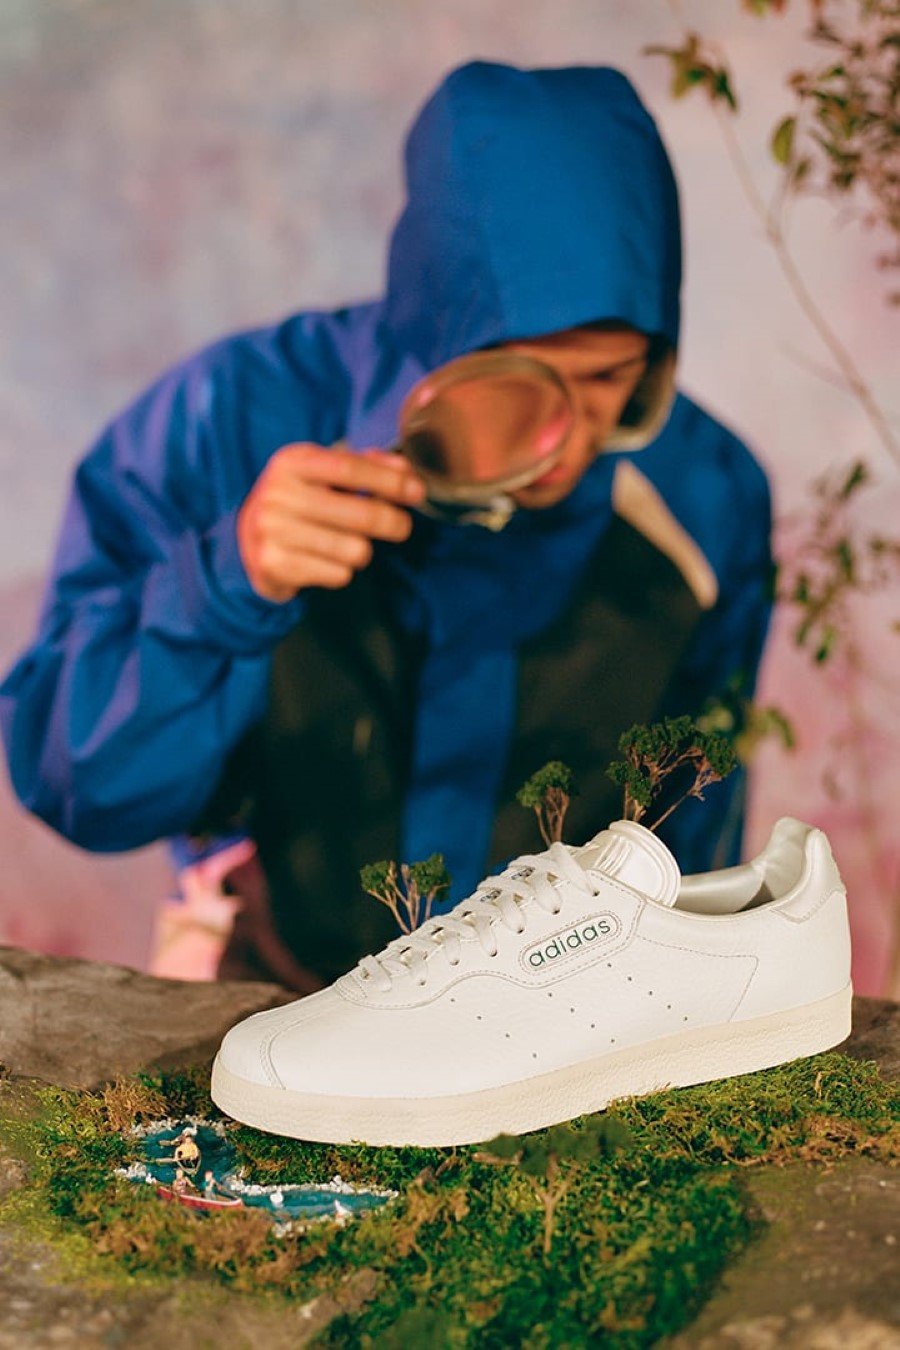 adidas Skateboarding x Alltimers Capsule Automne-Hiver 2019-2020